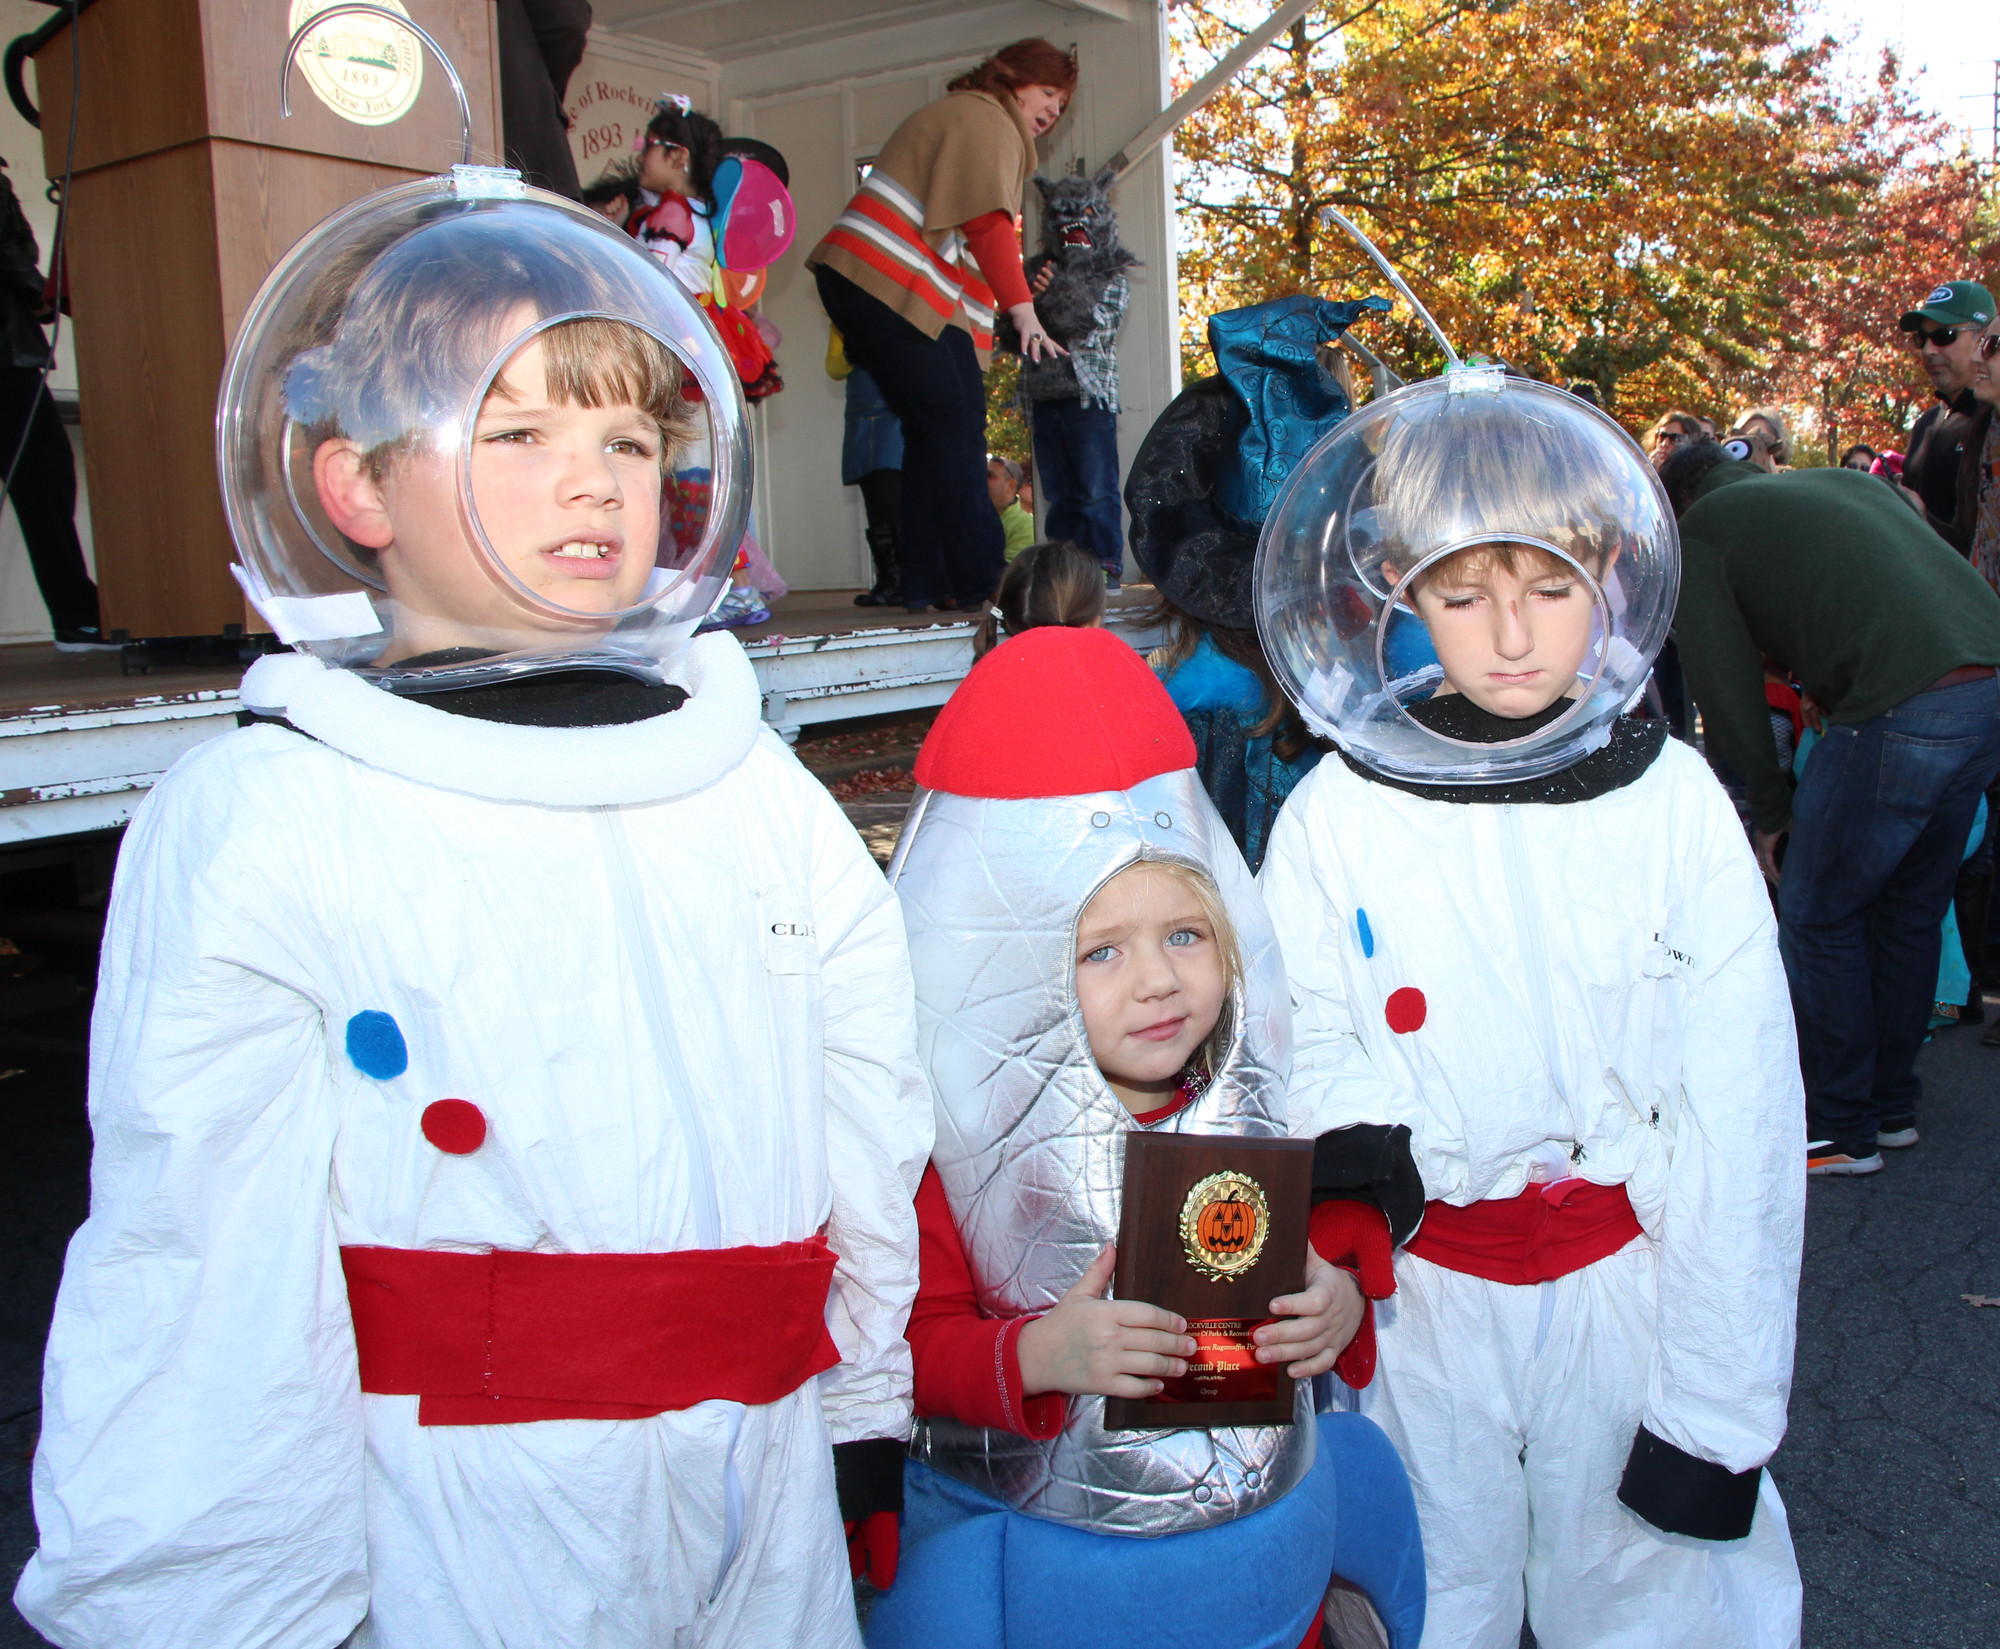 These astronauts and their little spaceship received an award for their creative costumes.